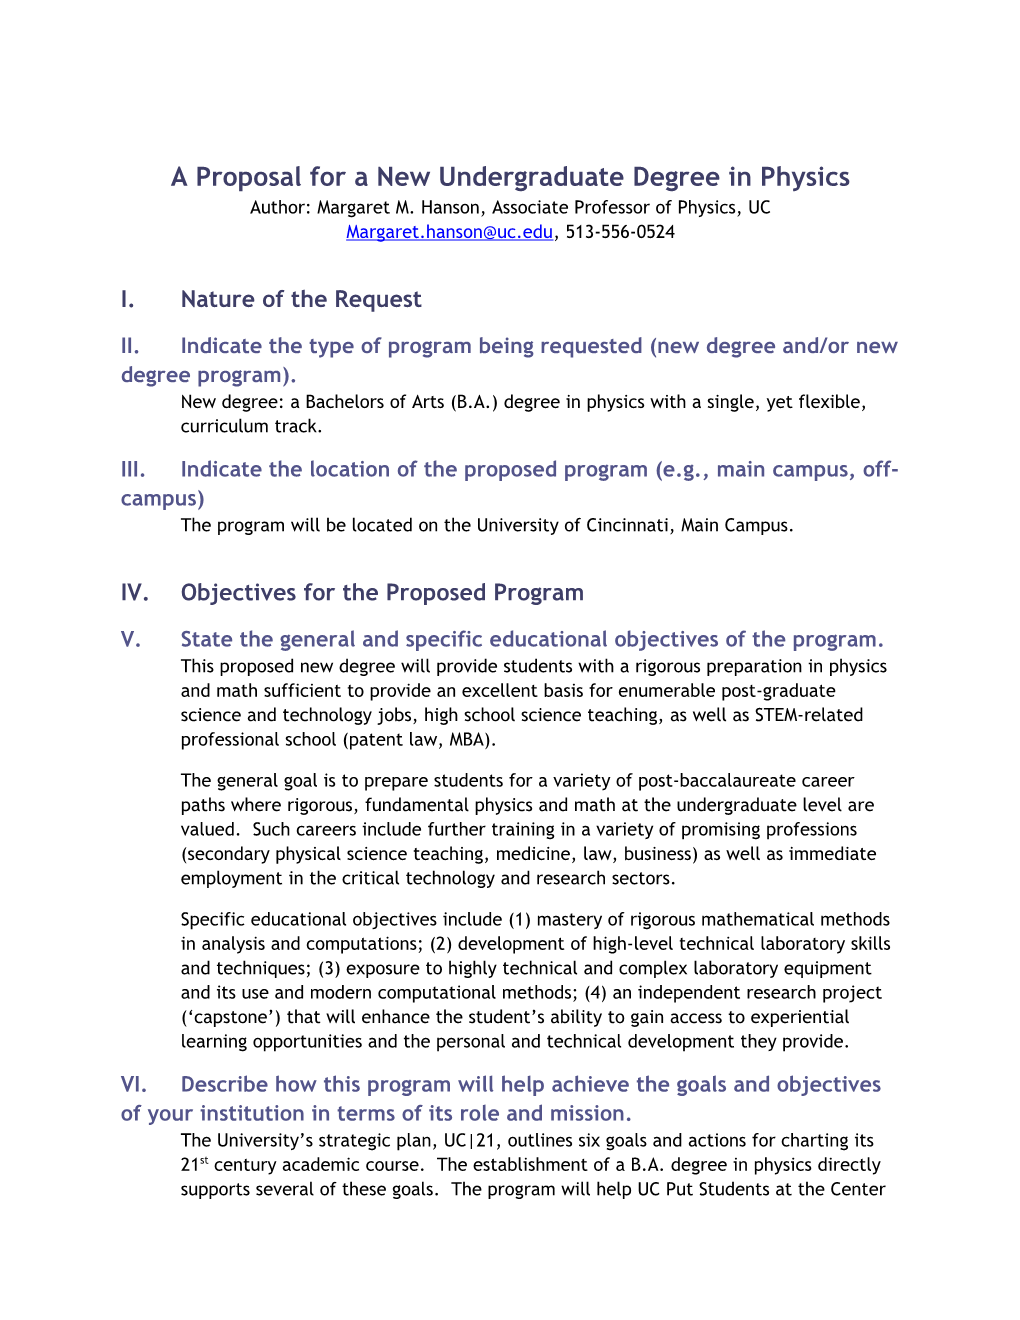 A Proposal for a New Undergraduate Degree in Physics